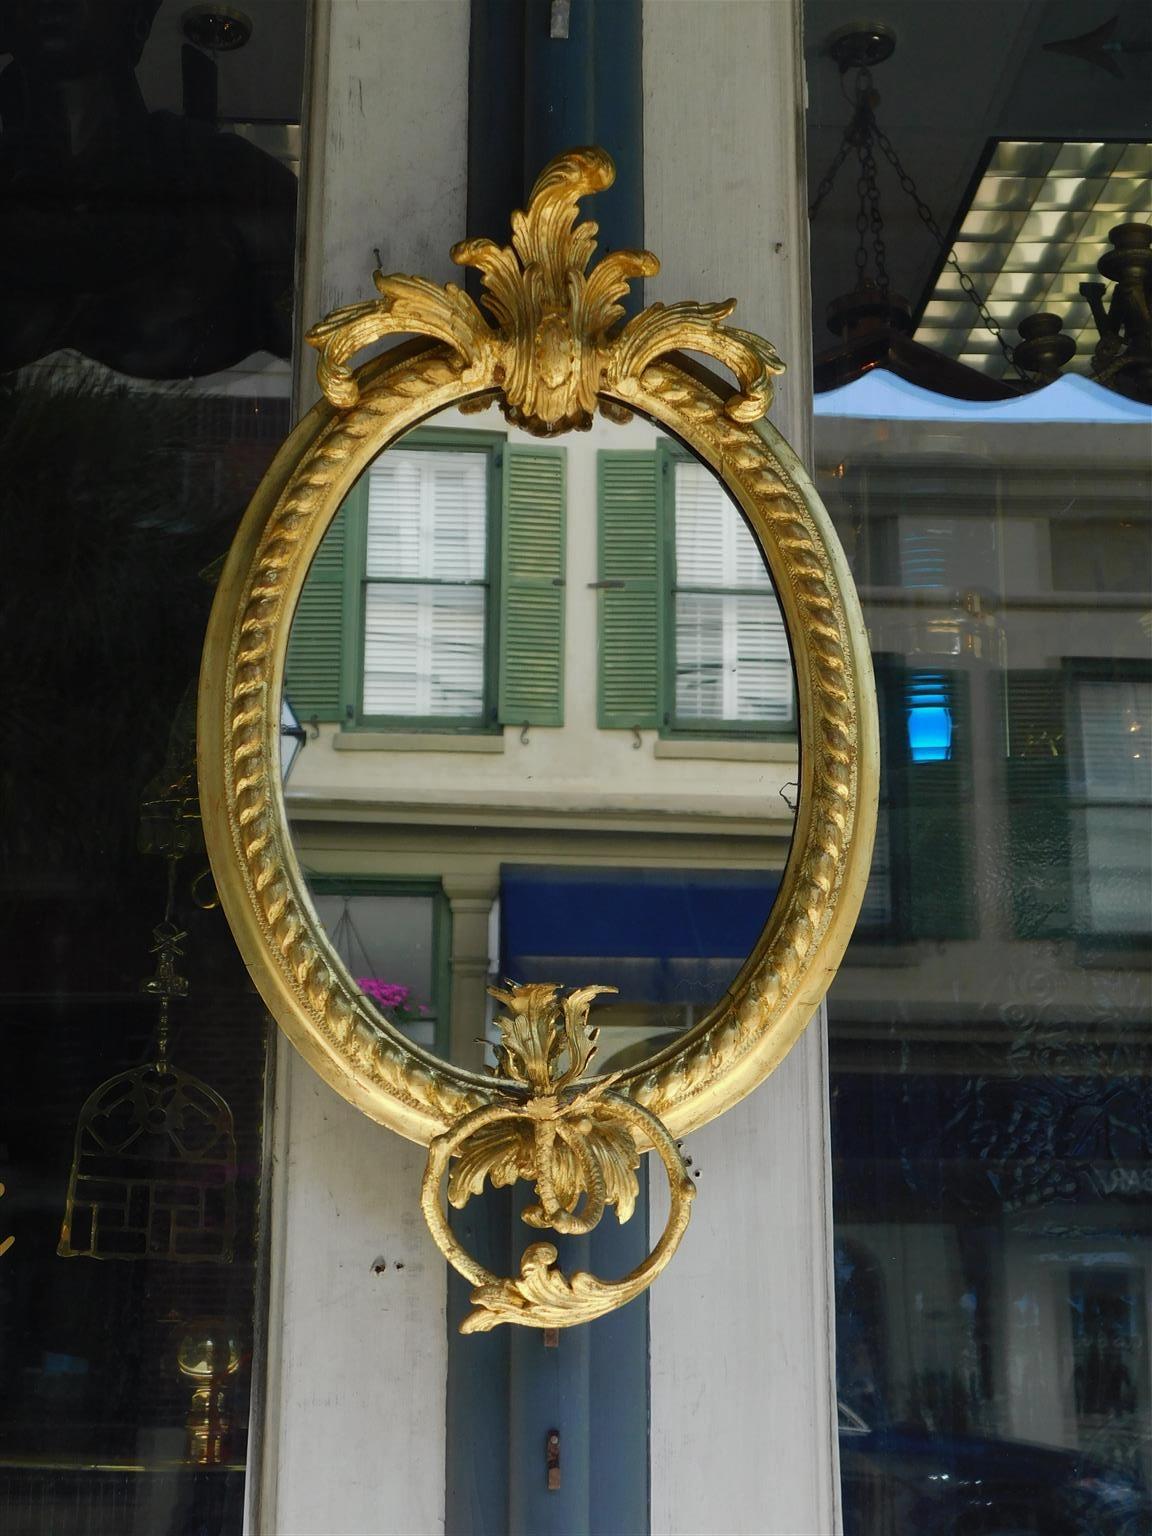 French oval gilt wood and gesso wall mirror with a foliage crest, gadrooned border, and single scrolled acanthus candle arm, Late 18th century. Mirror retains the original glass & wood backing.